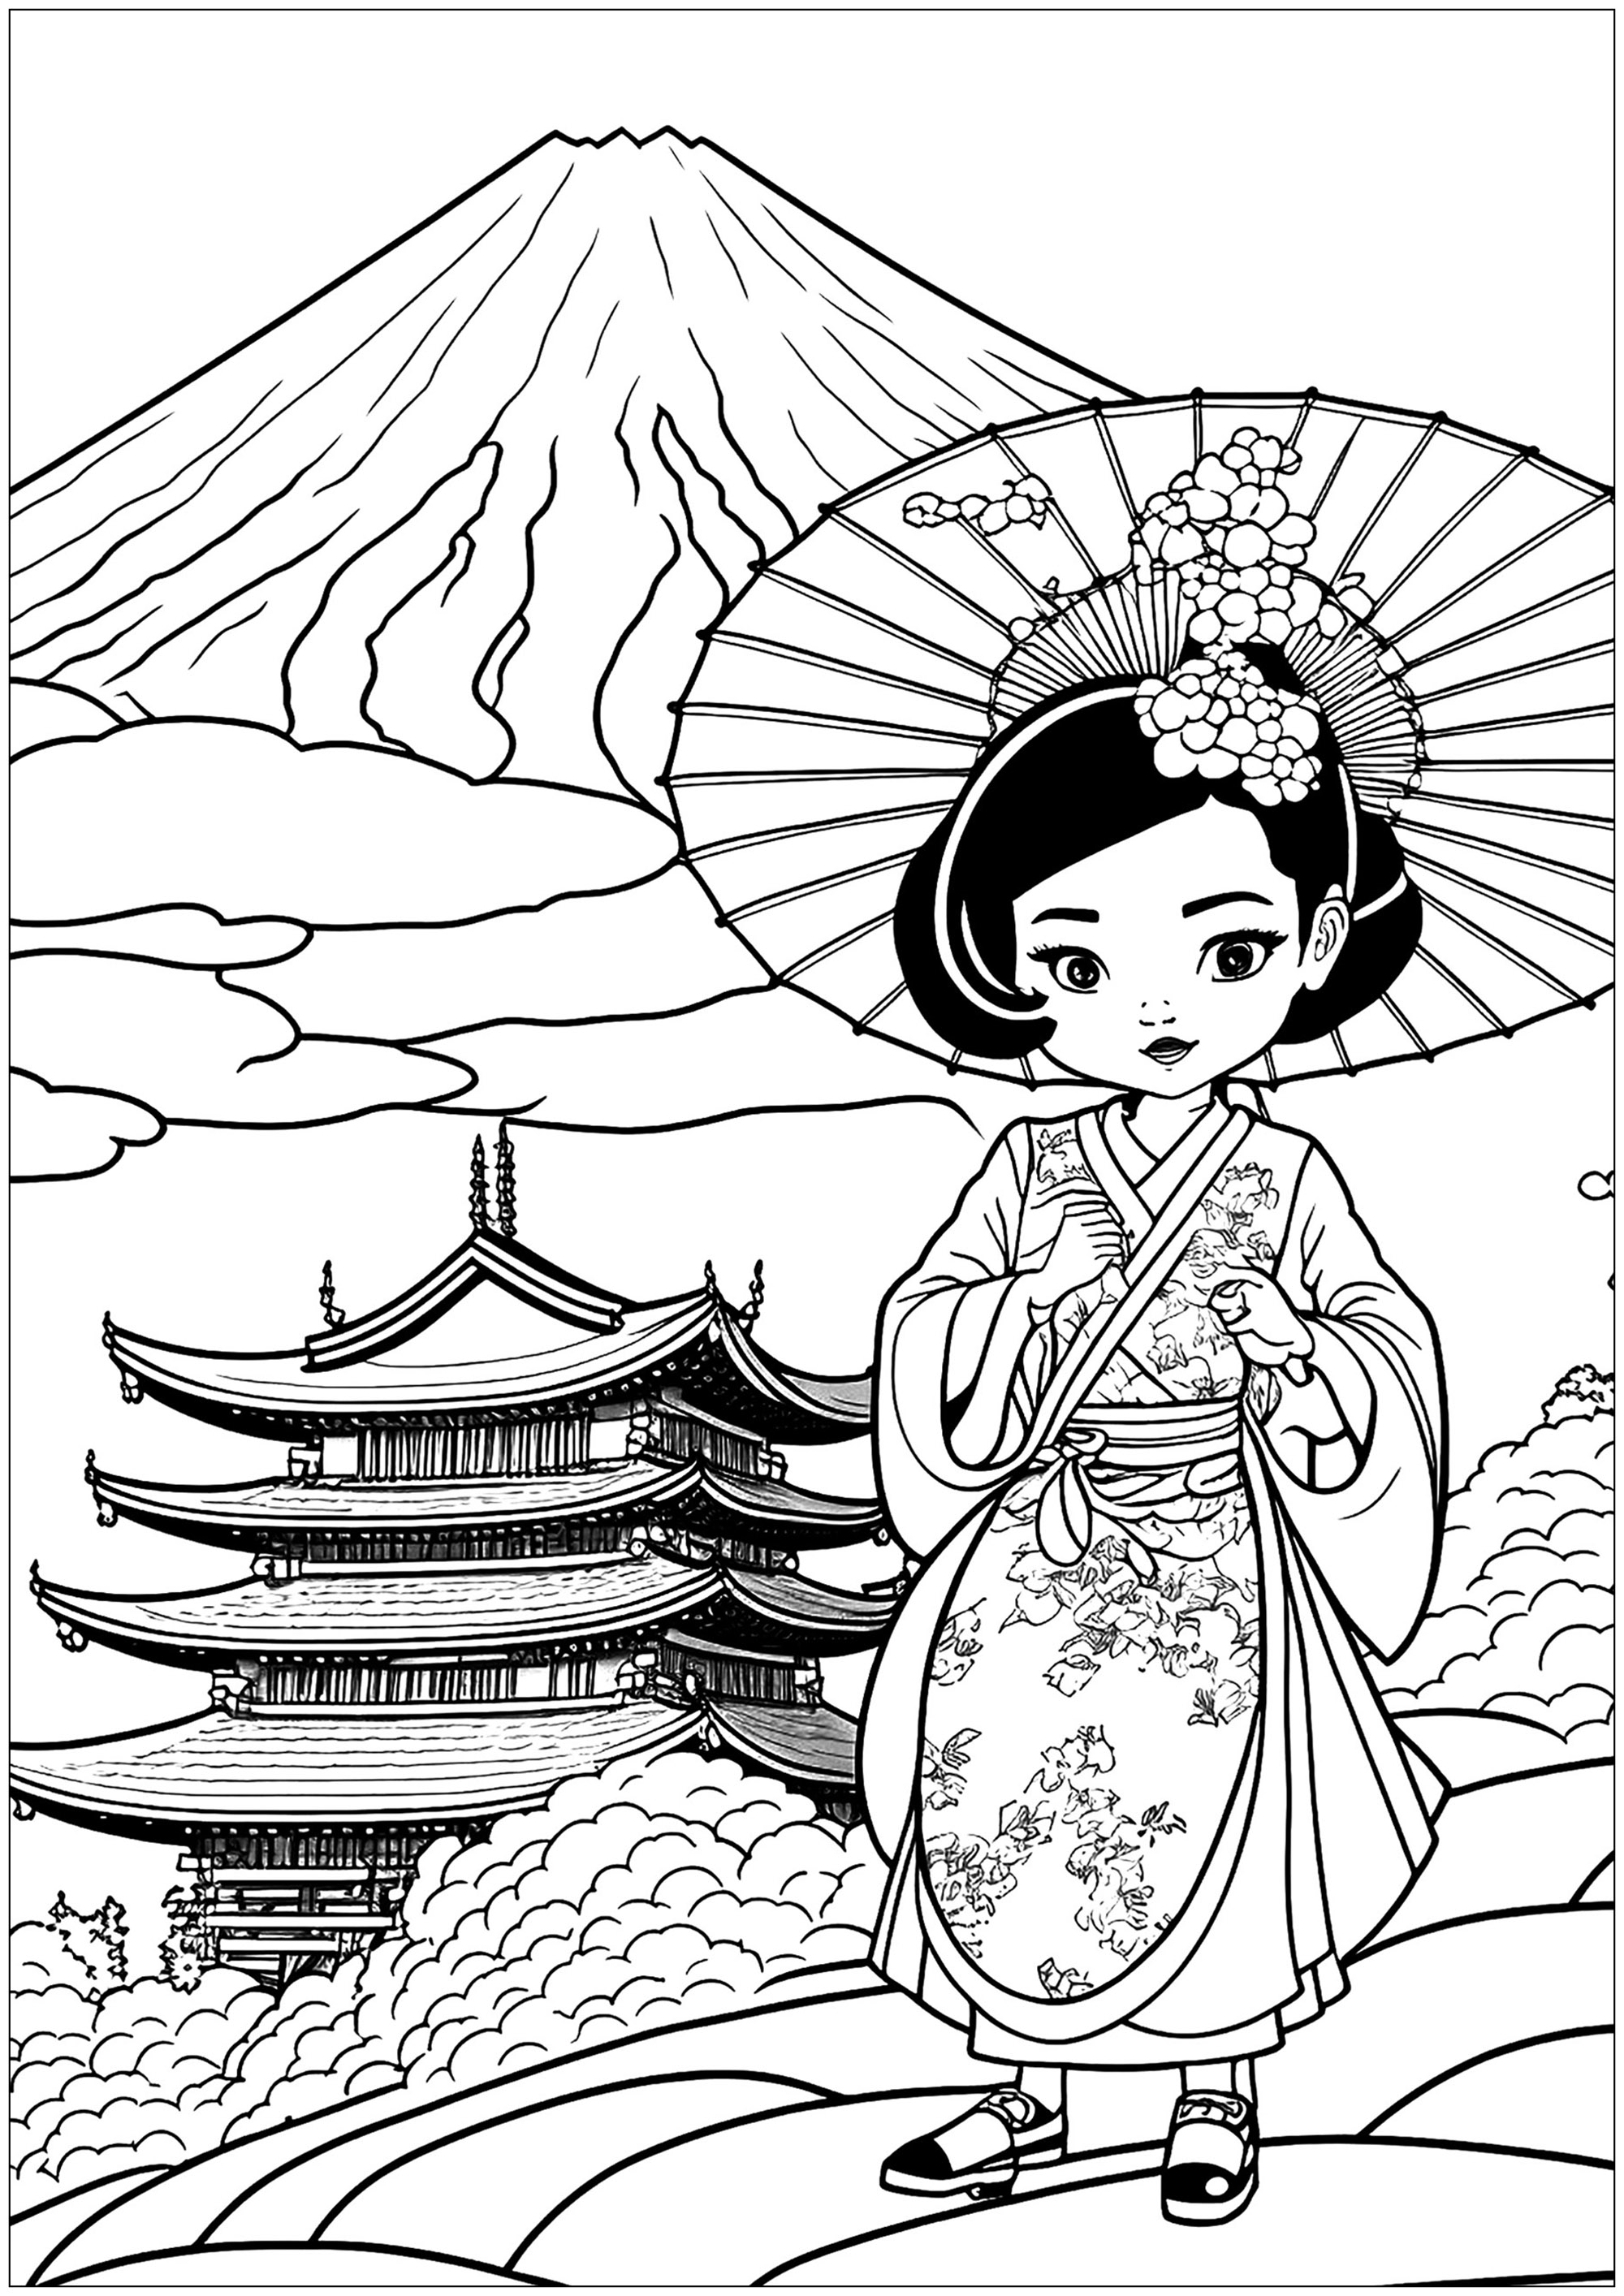 Young Geisha with Mount Fuji and a Japanese temple in the background